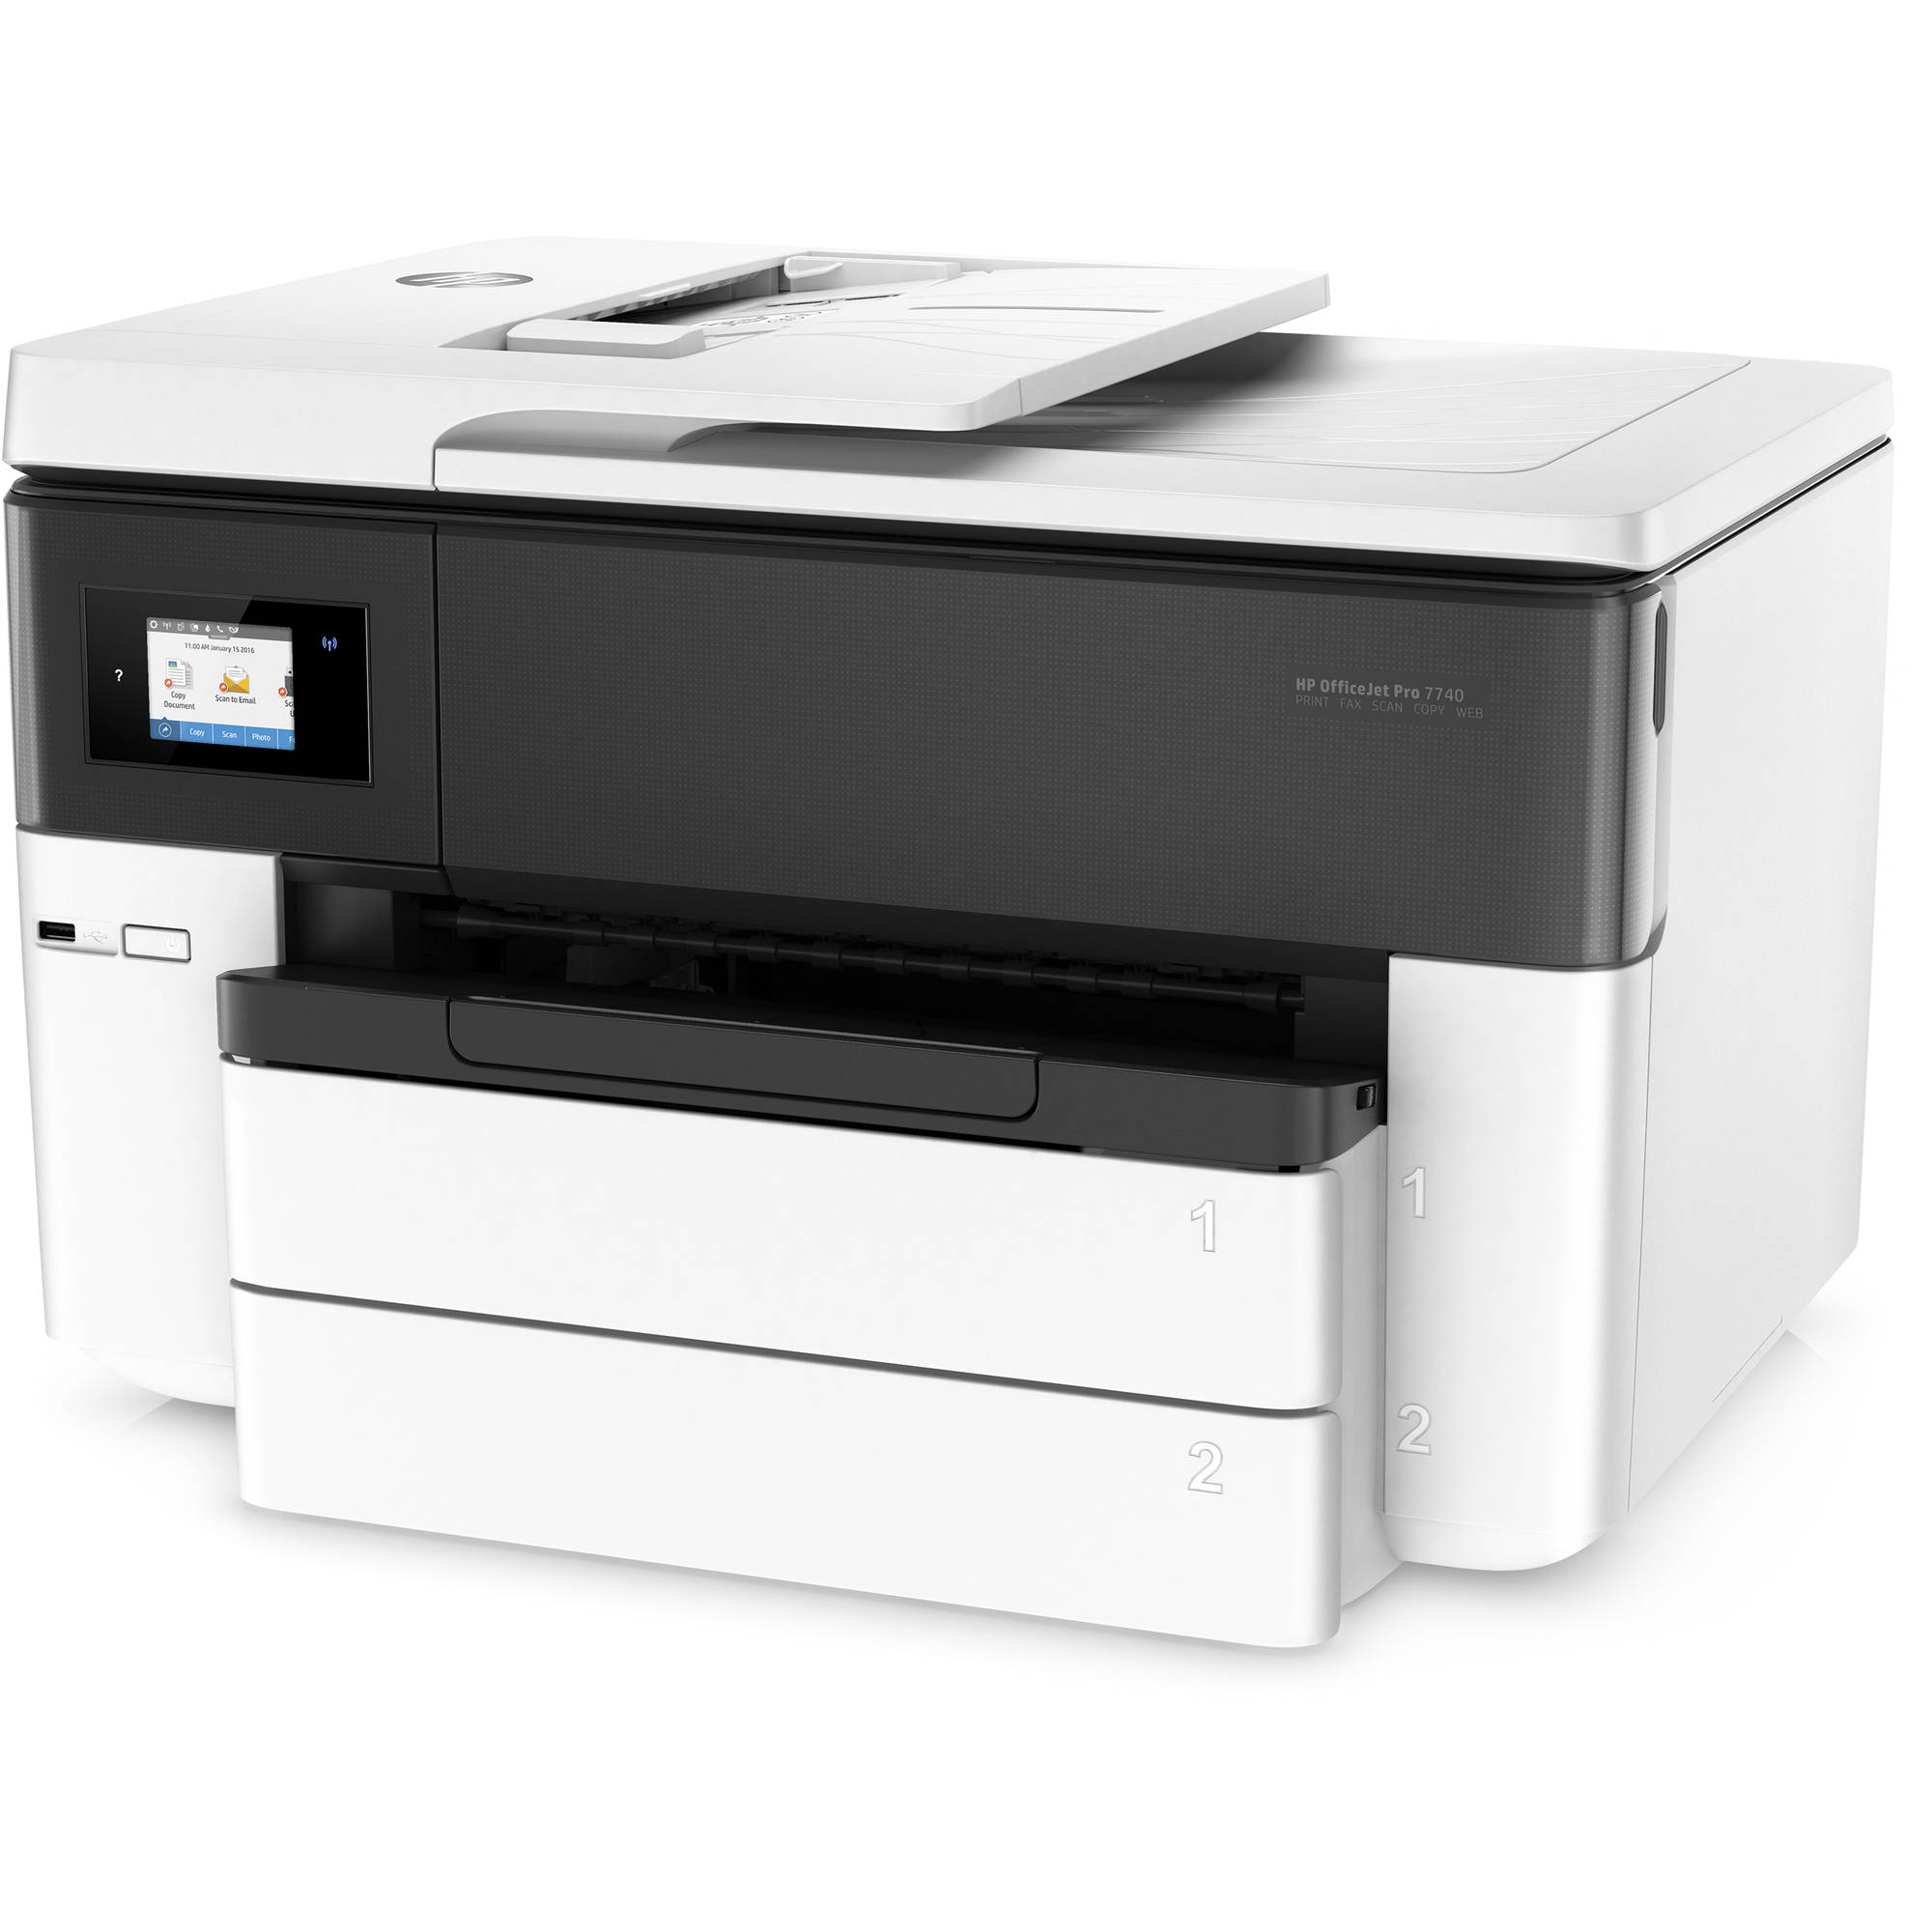 Hp Officejet Pro 7720 Driver Download Free - Hp Officejet Pro 7720 Driver - For more information ...